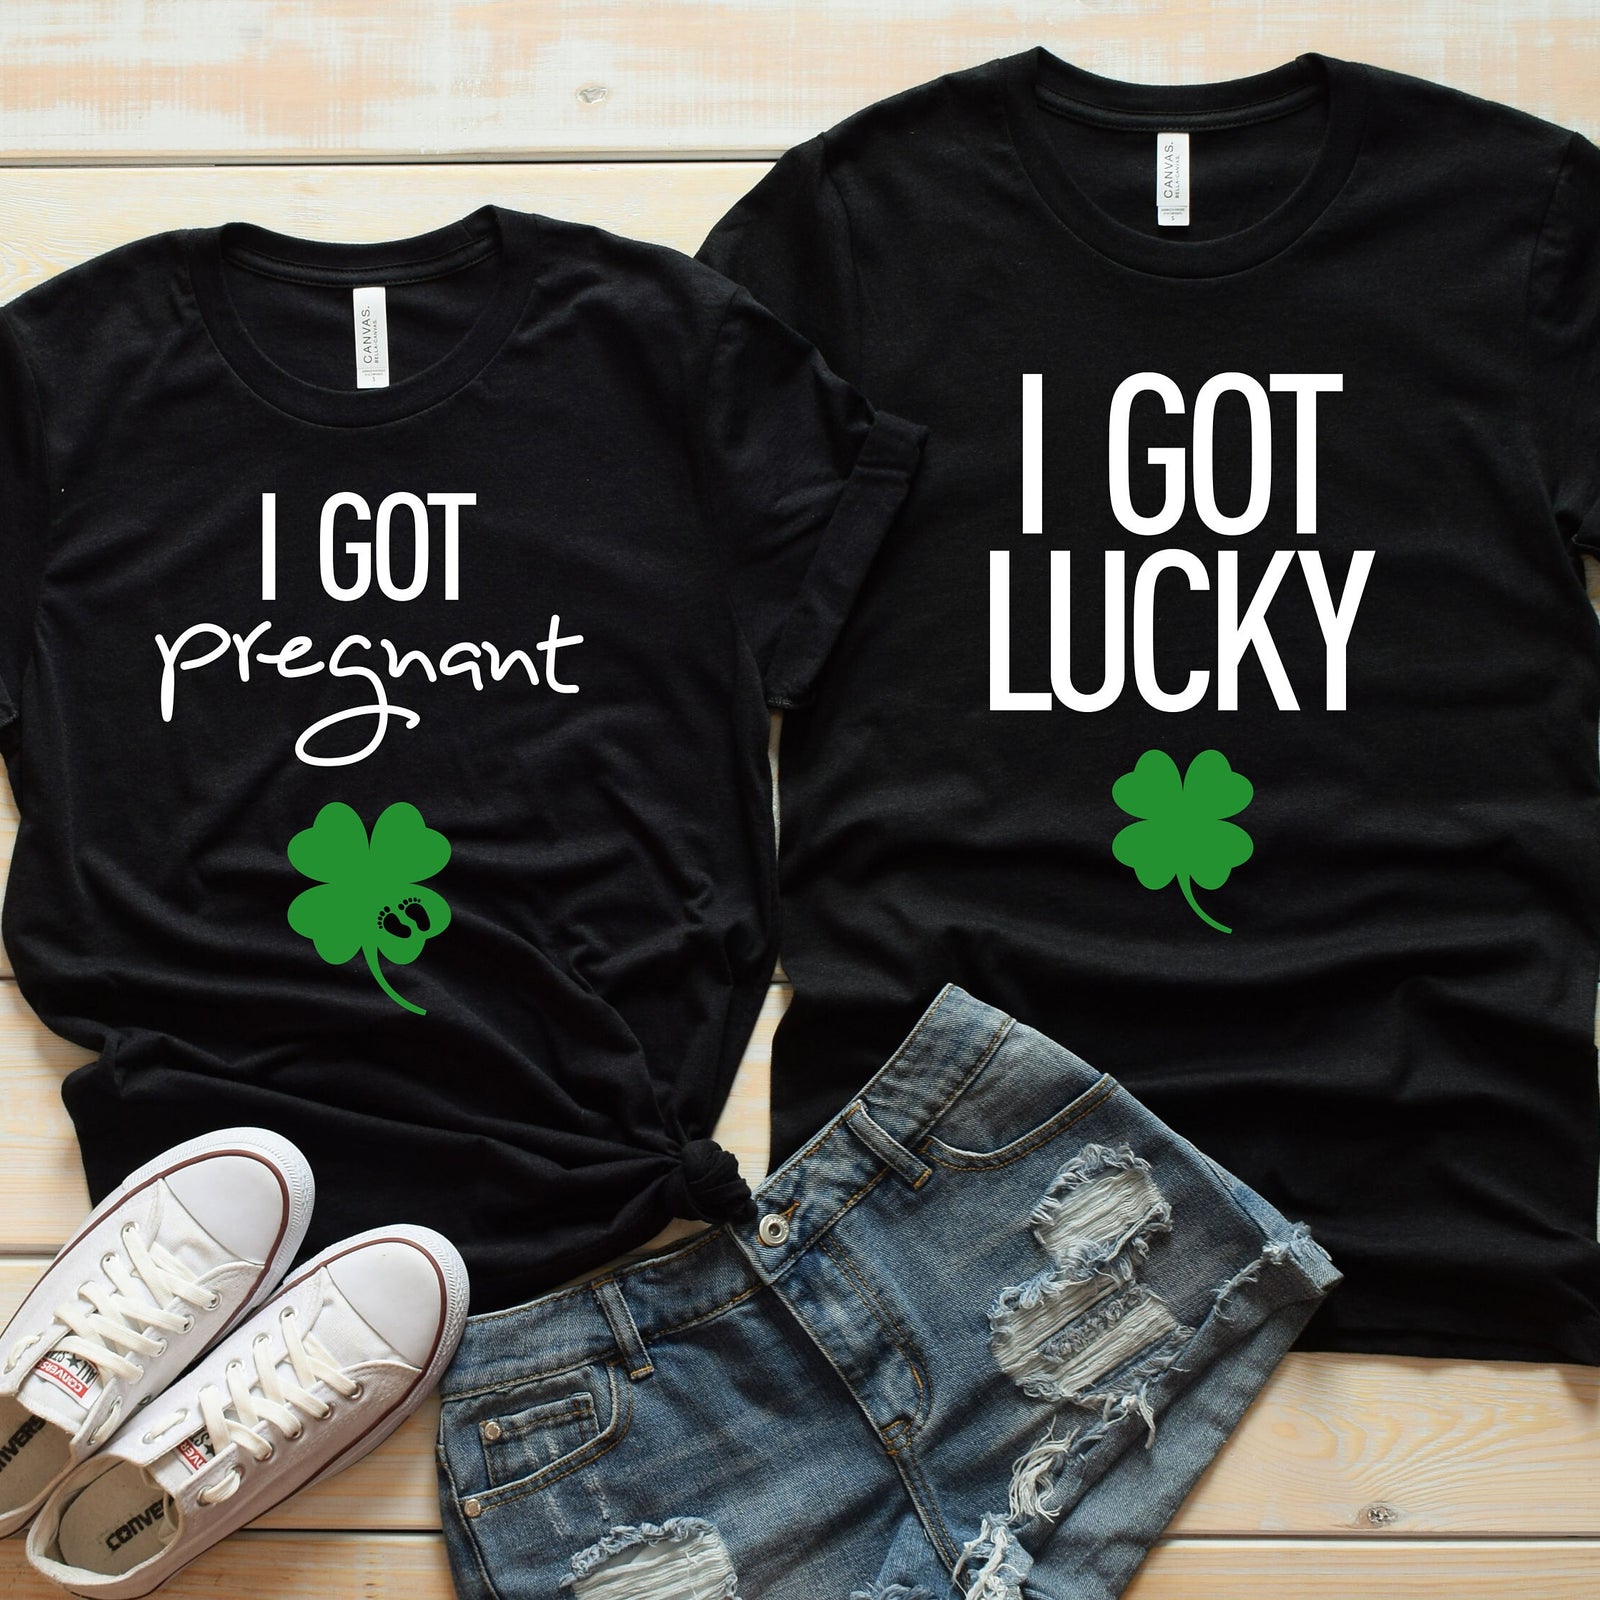 I Got Pregnant and I got Lucky Matching Shirts - Cute Pregnancy Announcement - St. Patrick's Day - Clover